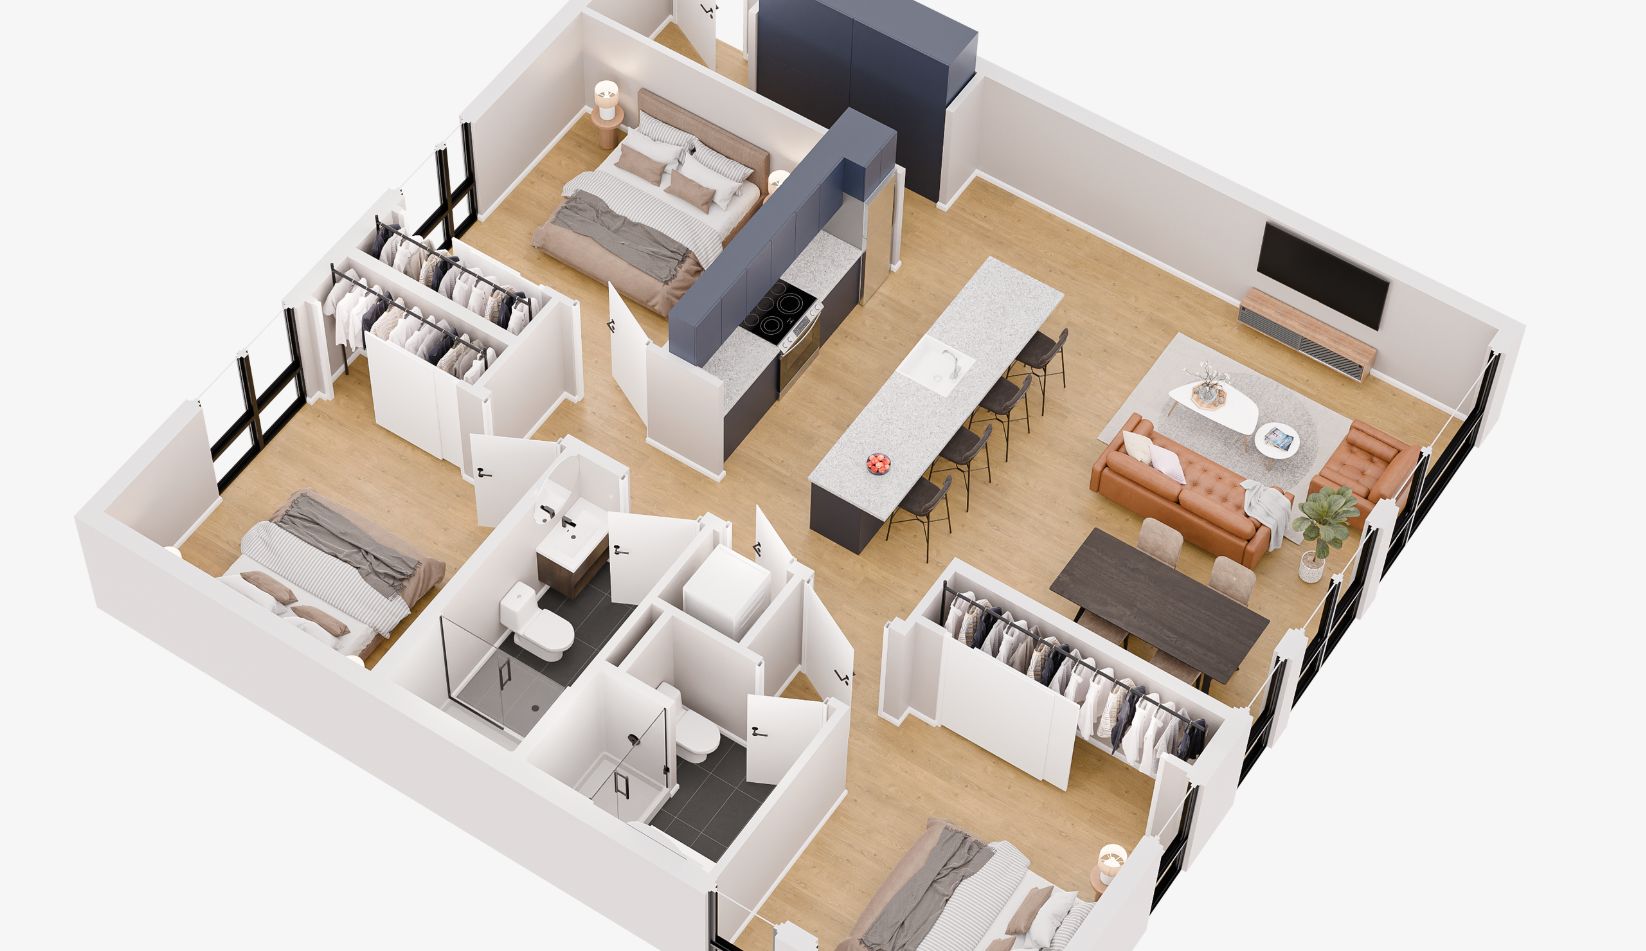 The Luxe Phase I at 1705 North American Street. Two-bedroom apartment. Axonometric floor plan via Luxe Fishtown